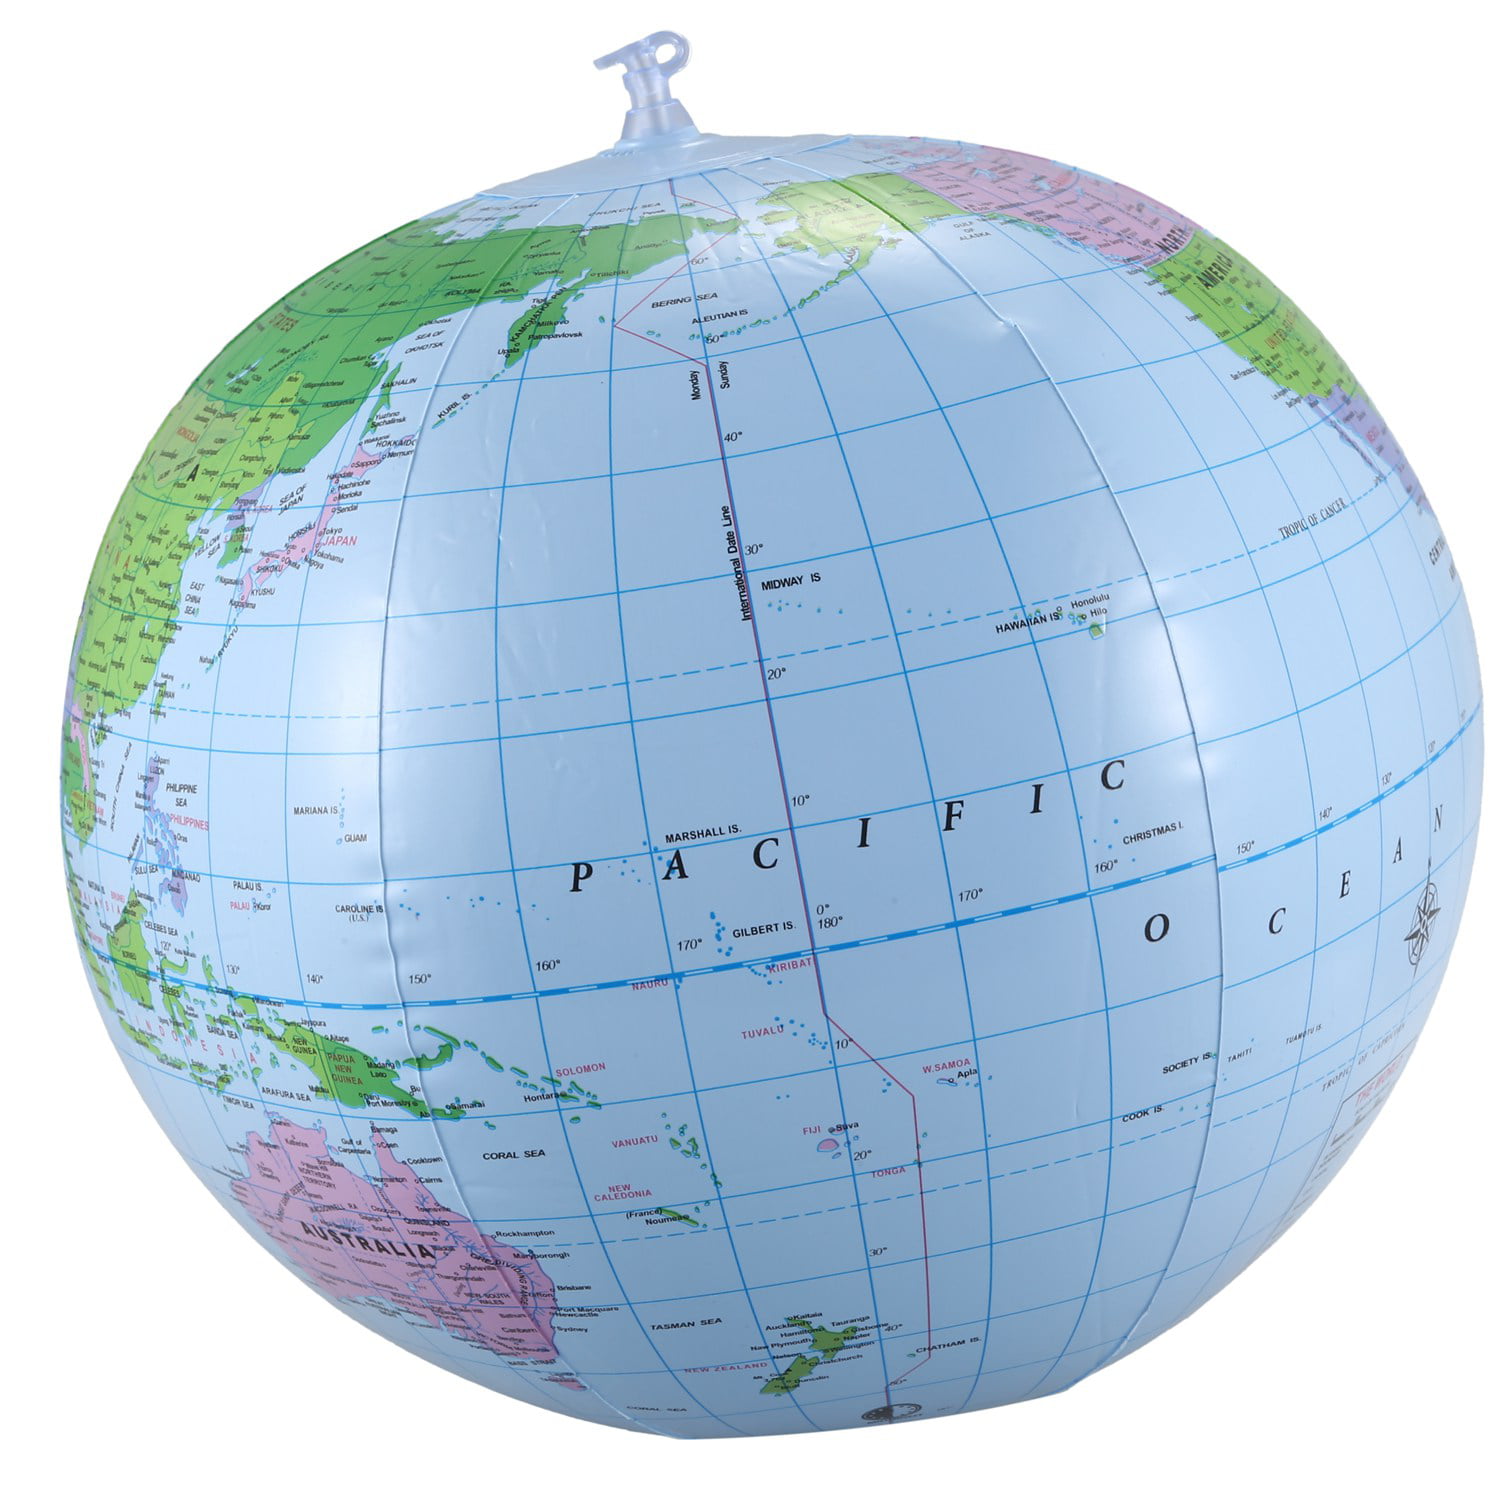 Inflatable Toy Globe Tellurion Training Geography Map Balloon Water Ball 40 C M4 for sale online 